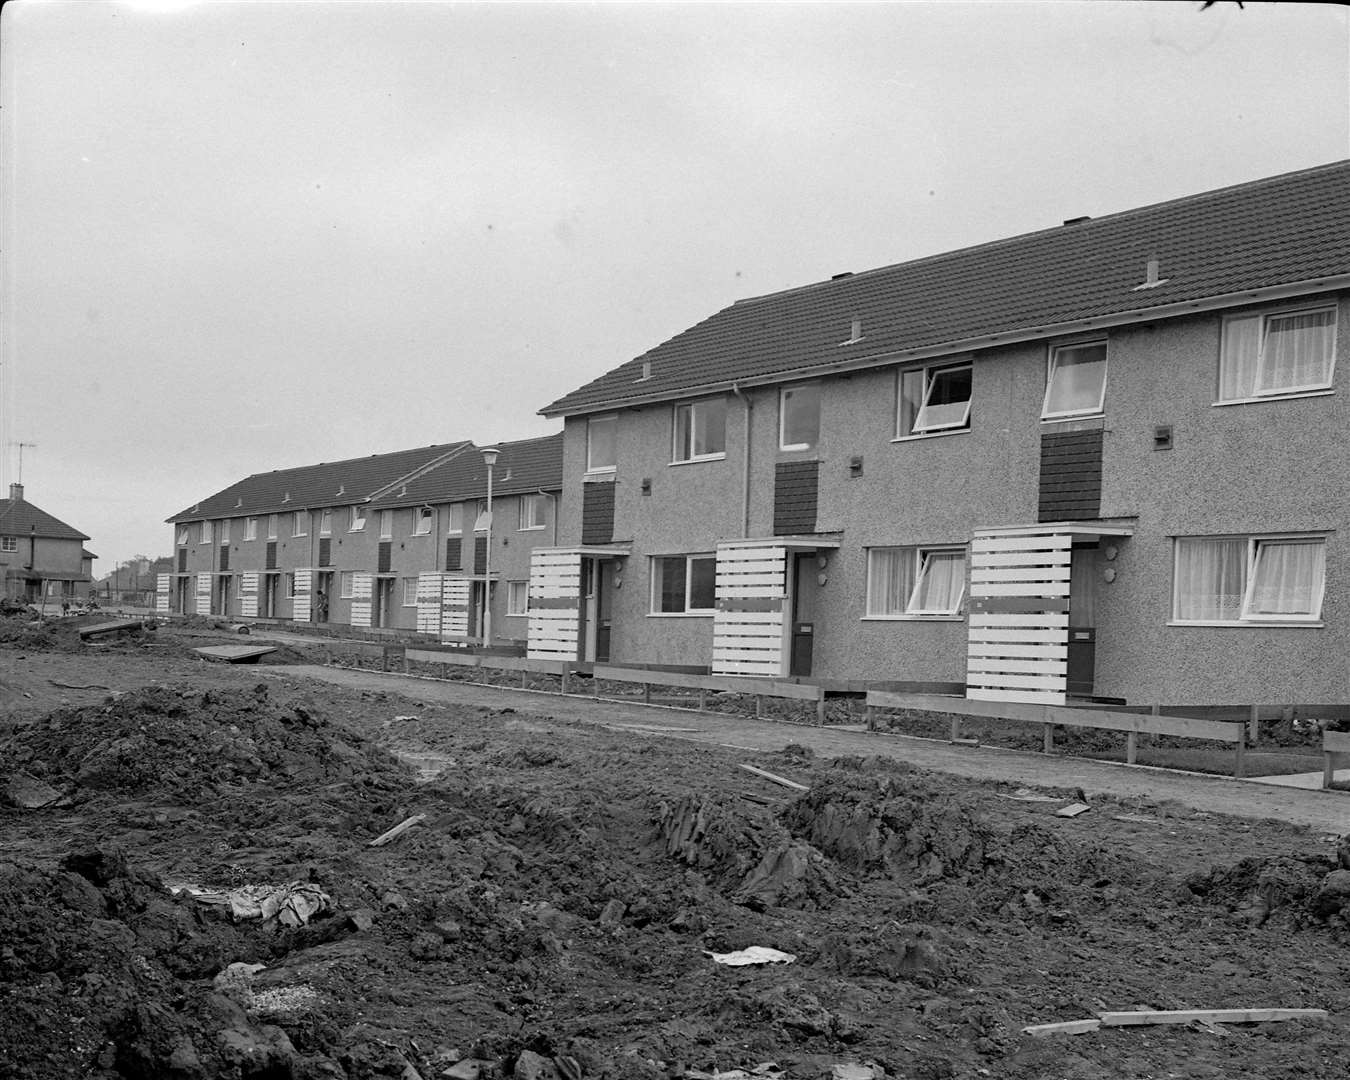 Standardised terrace housing - as seen here in the early days of the estate - is still prevalent across much of the estate. Picture: Steve Salter